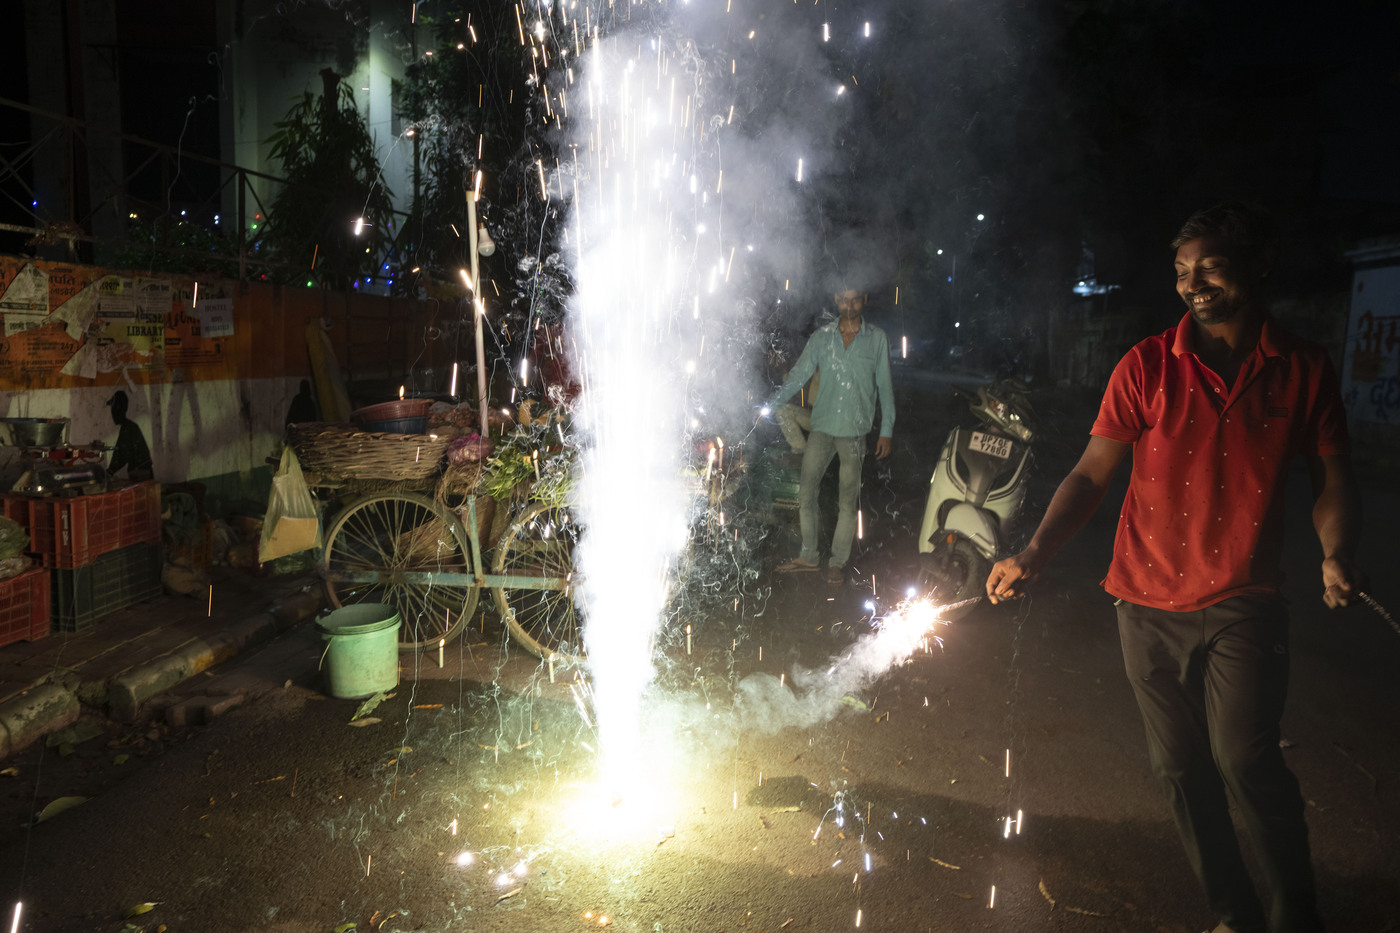 An Indian vegetable vendor lights firecrackers to celebrate Diwali, the Hindu festival of lights, in Prayagraj, in the northern state of Uttar Pradesh, India, Monday, Oct. 24, 2022. Indians across the country are celebrating Diwali, the Hindu festival that symbolizes the victory of light over darkness. (AP Photo/Rajesh Kumar Singh)